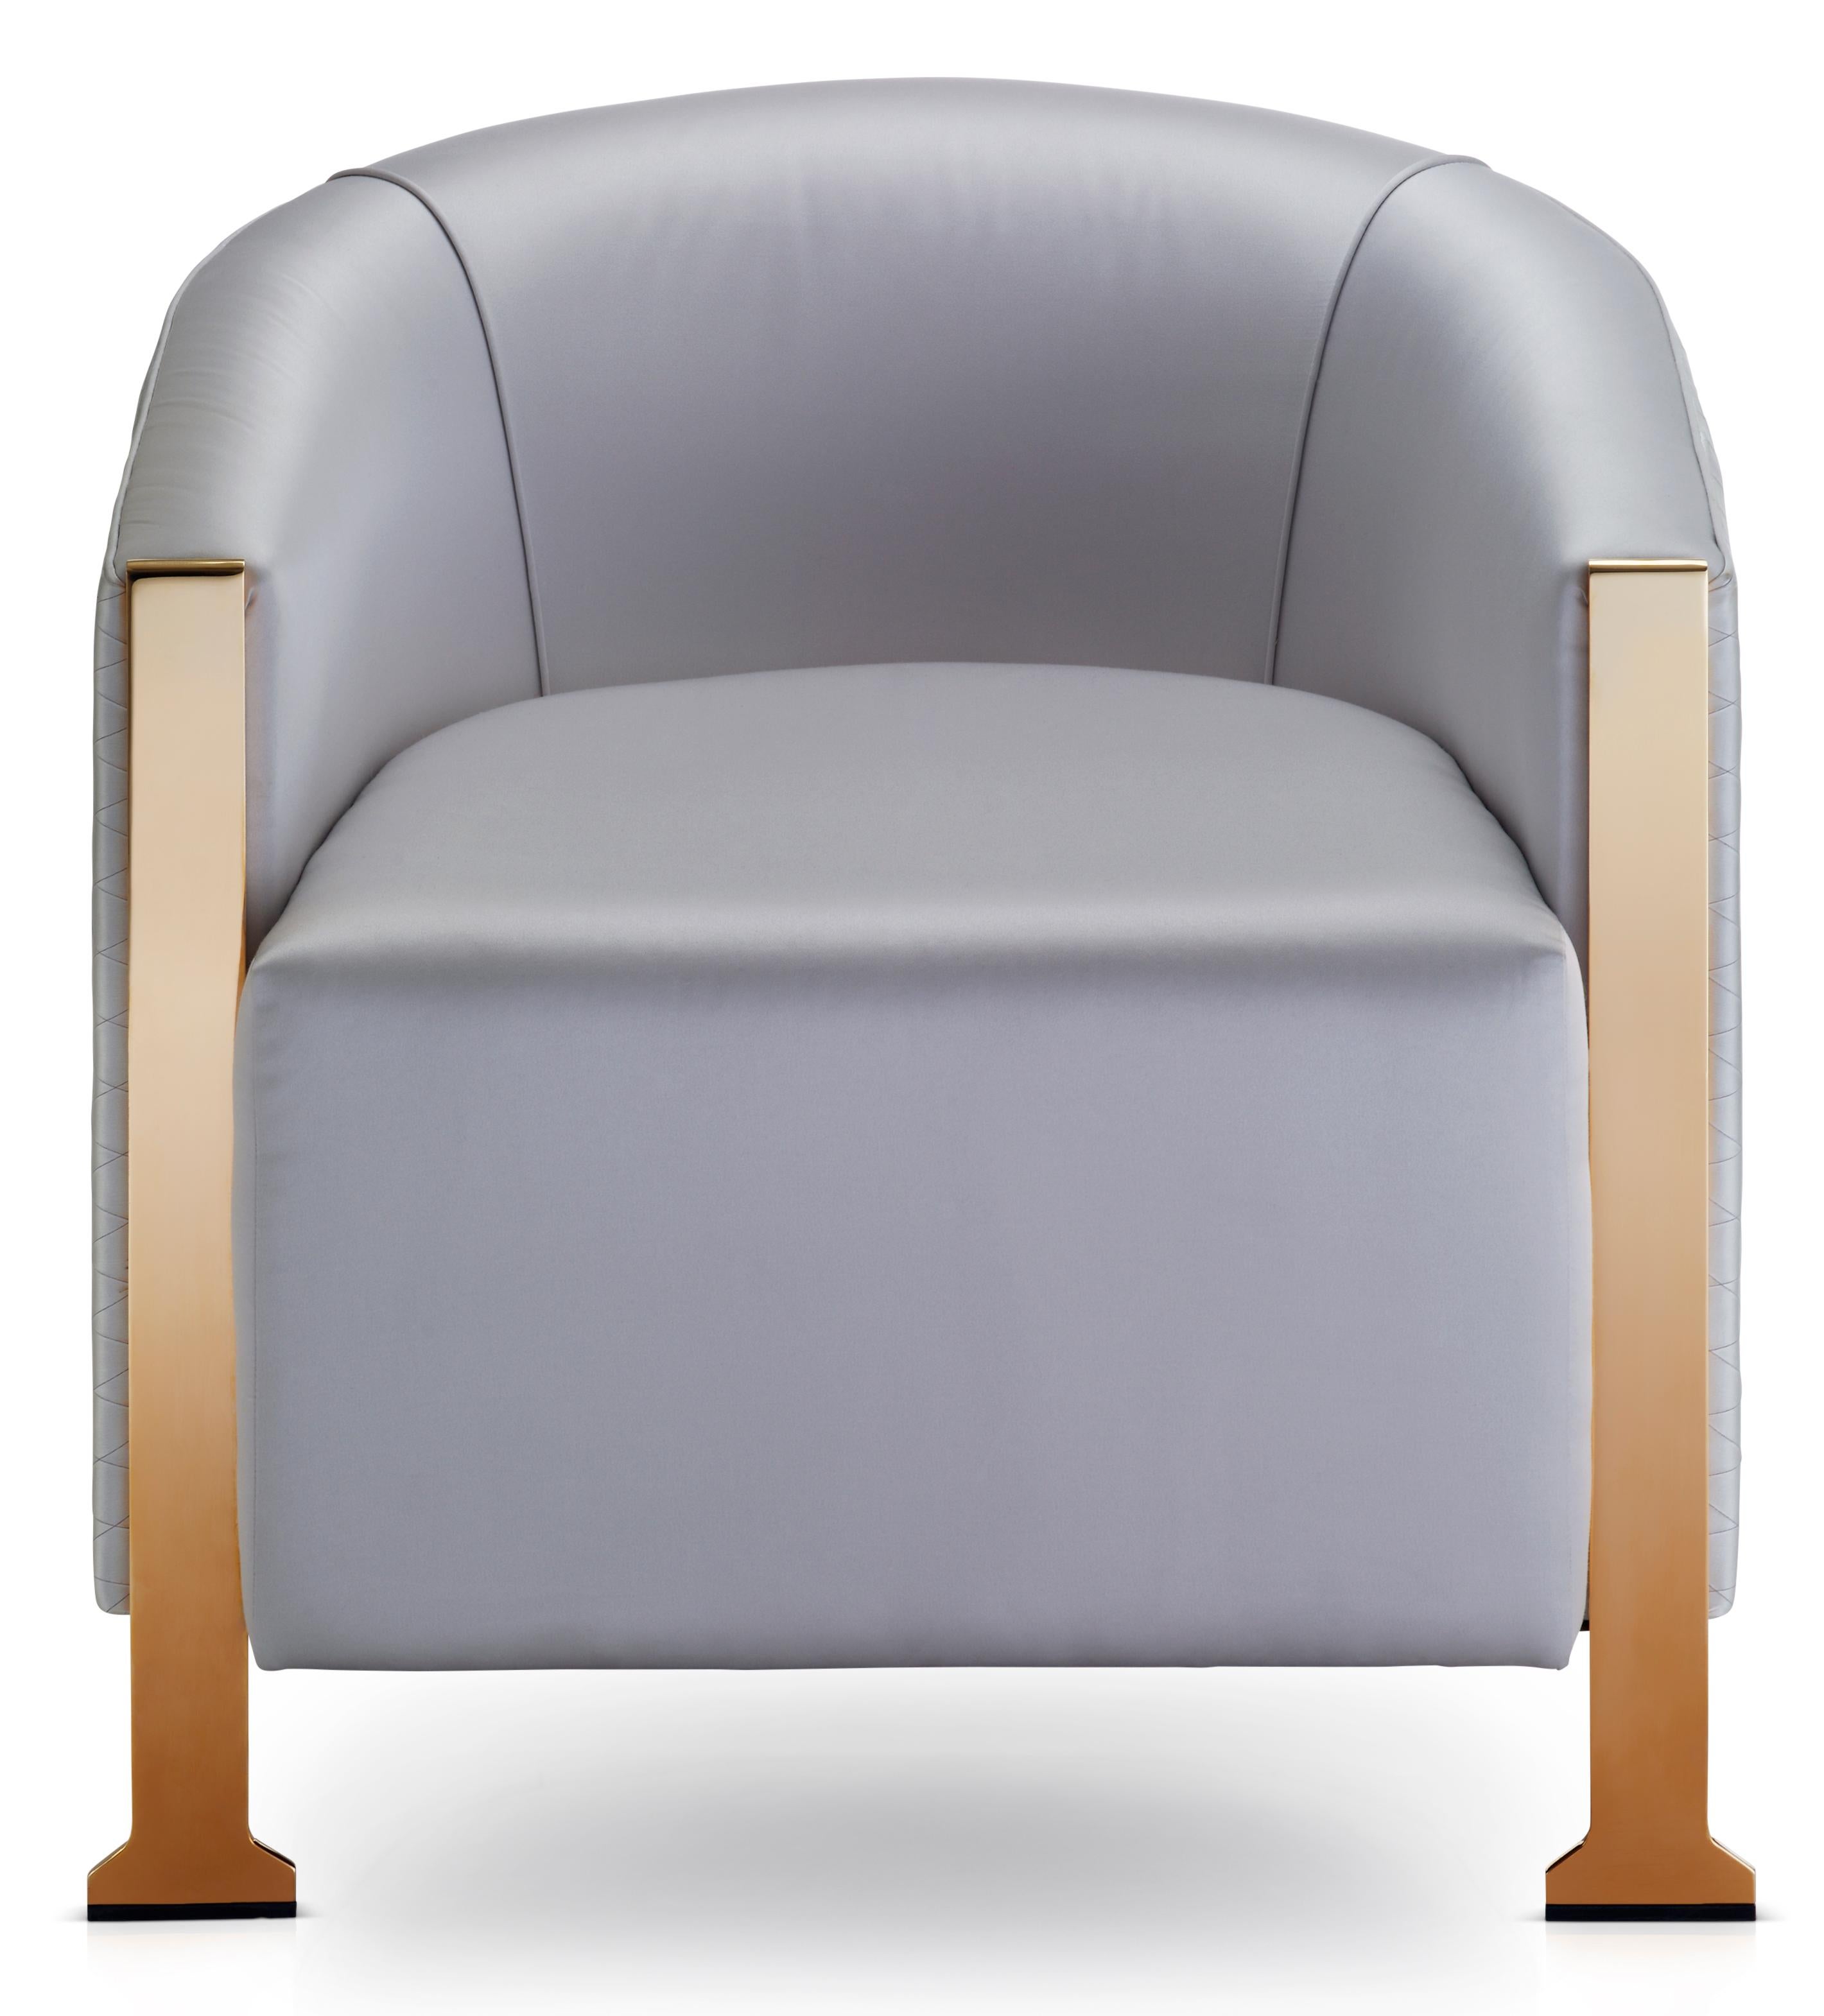 This beautiful curved tub chair stands on polished brass metal legs to bring a touch of quiet glamour to any space. The deep padded inner seat and back provides superior comfort. 

The chair is upholstered in specially selected elegant fabrics but